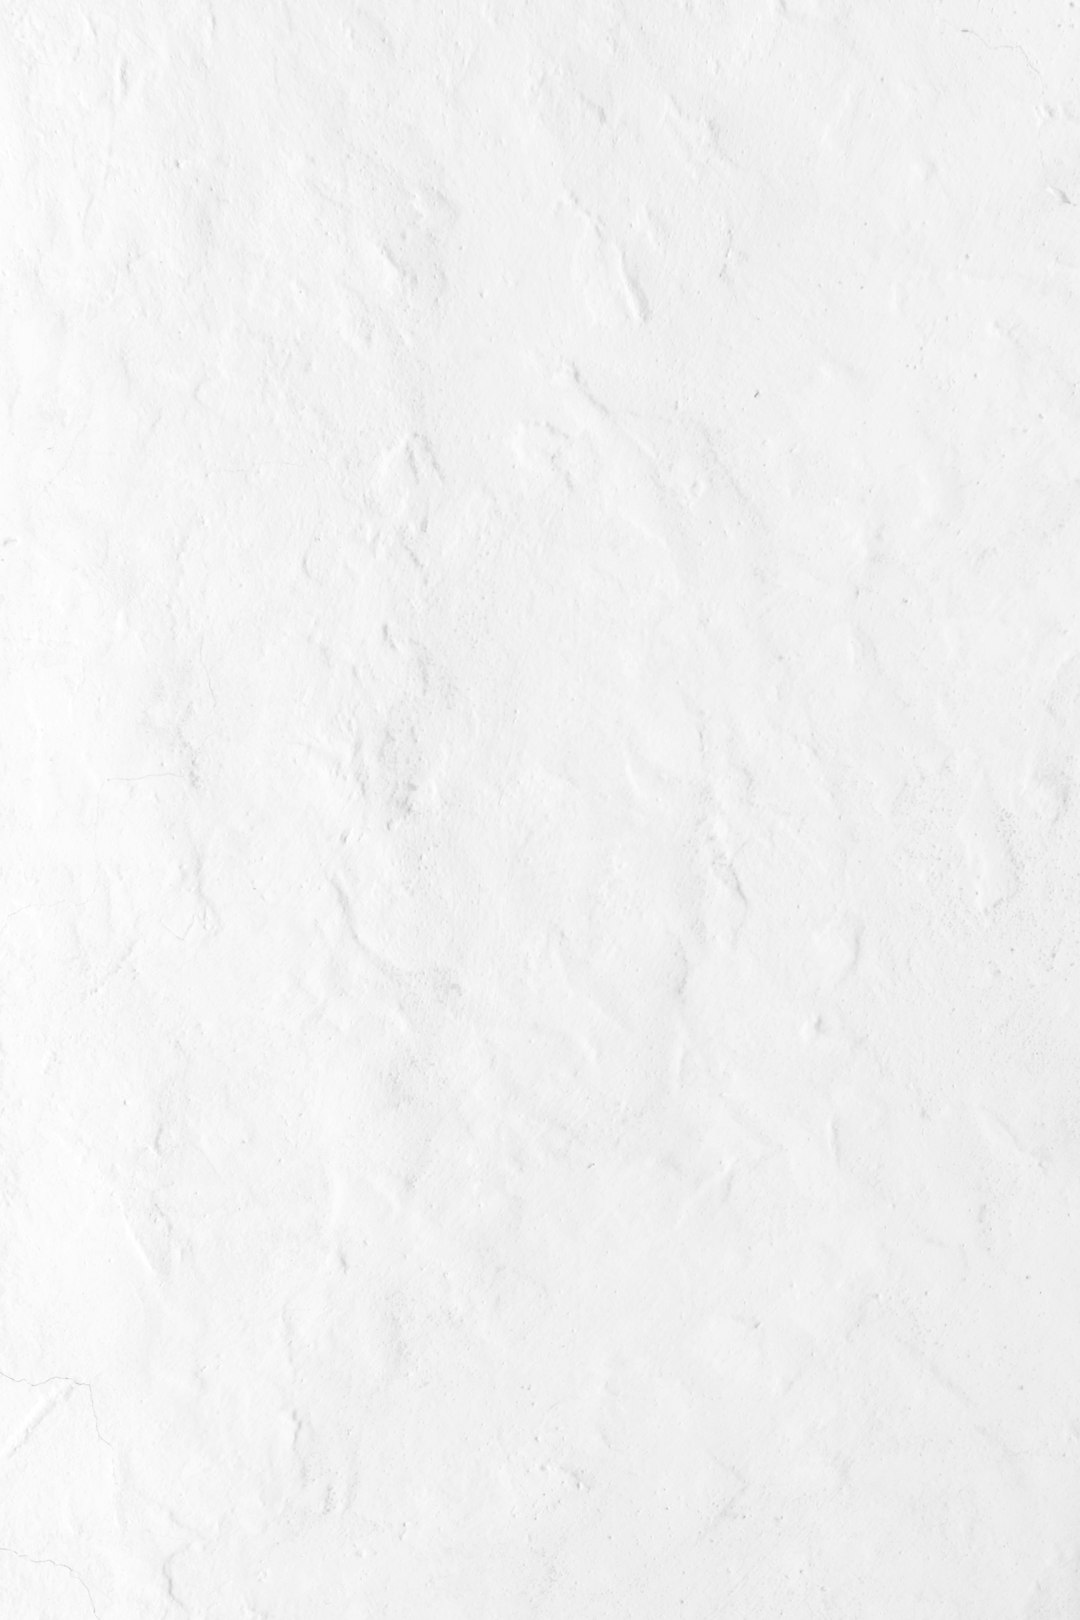 500+ White Wall Pictures [HD] | Download Free Images on Unsplash